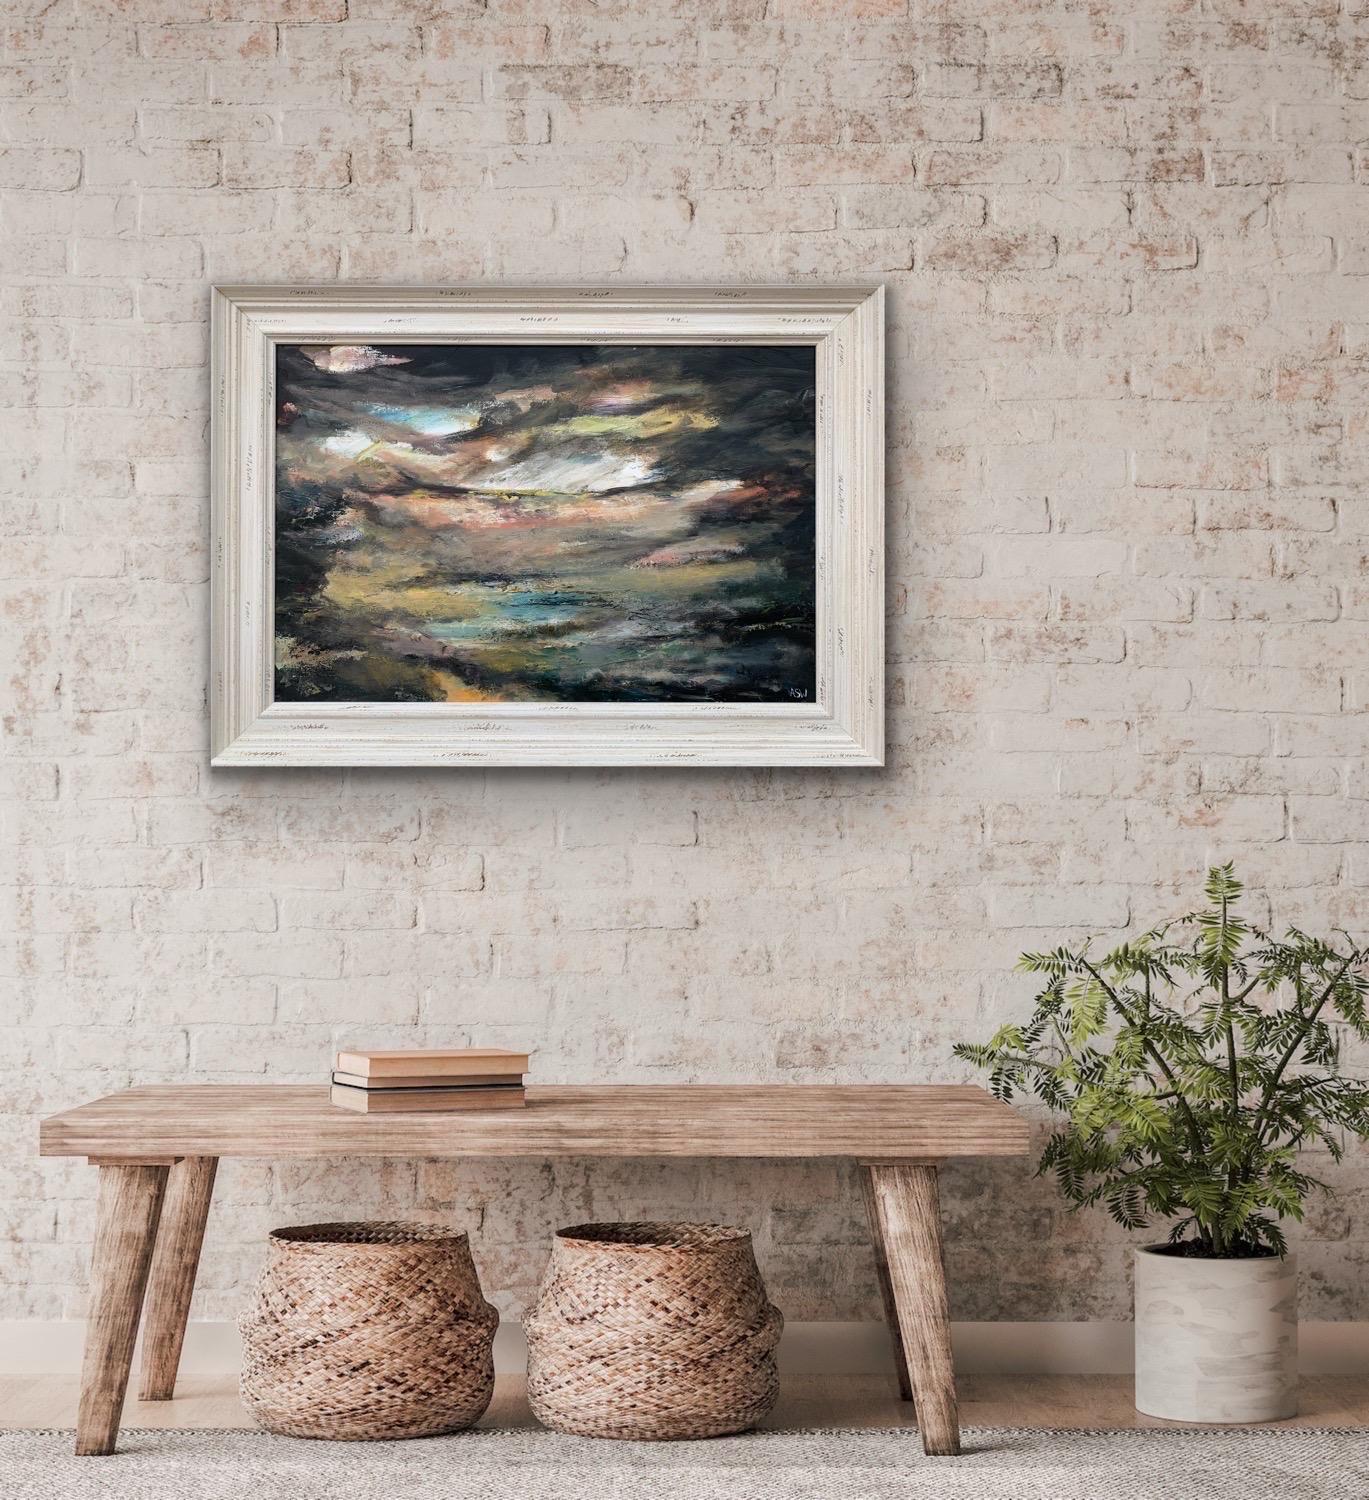 Dark Atmospheric Abstract Landscape Painting by Contemporary British Artist For Sale 2